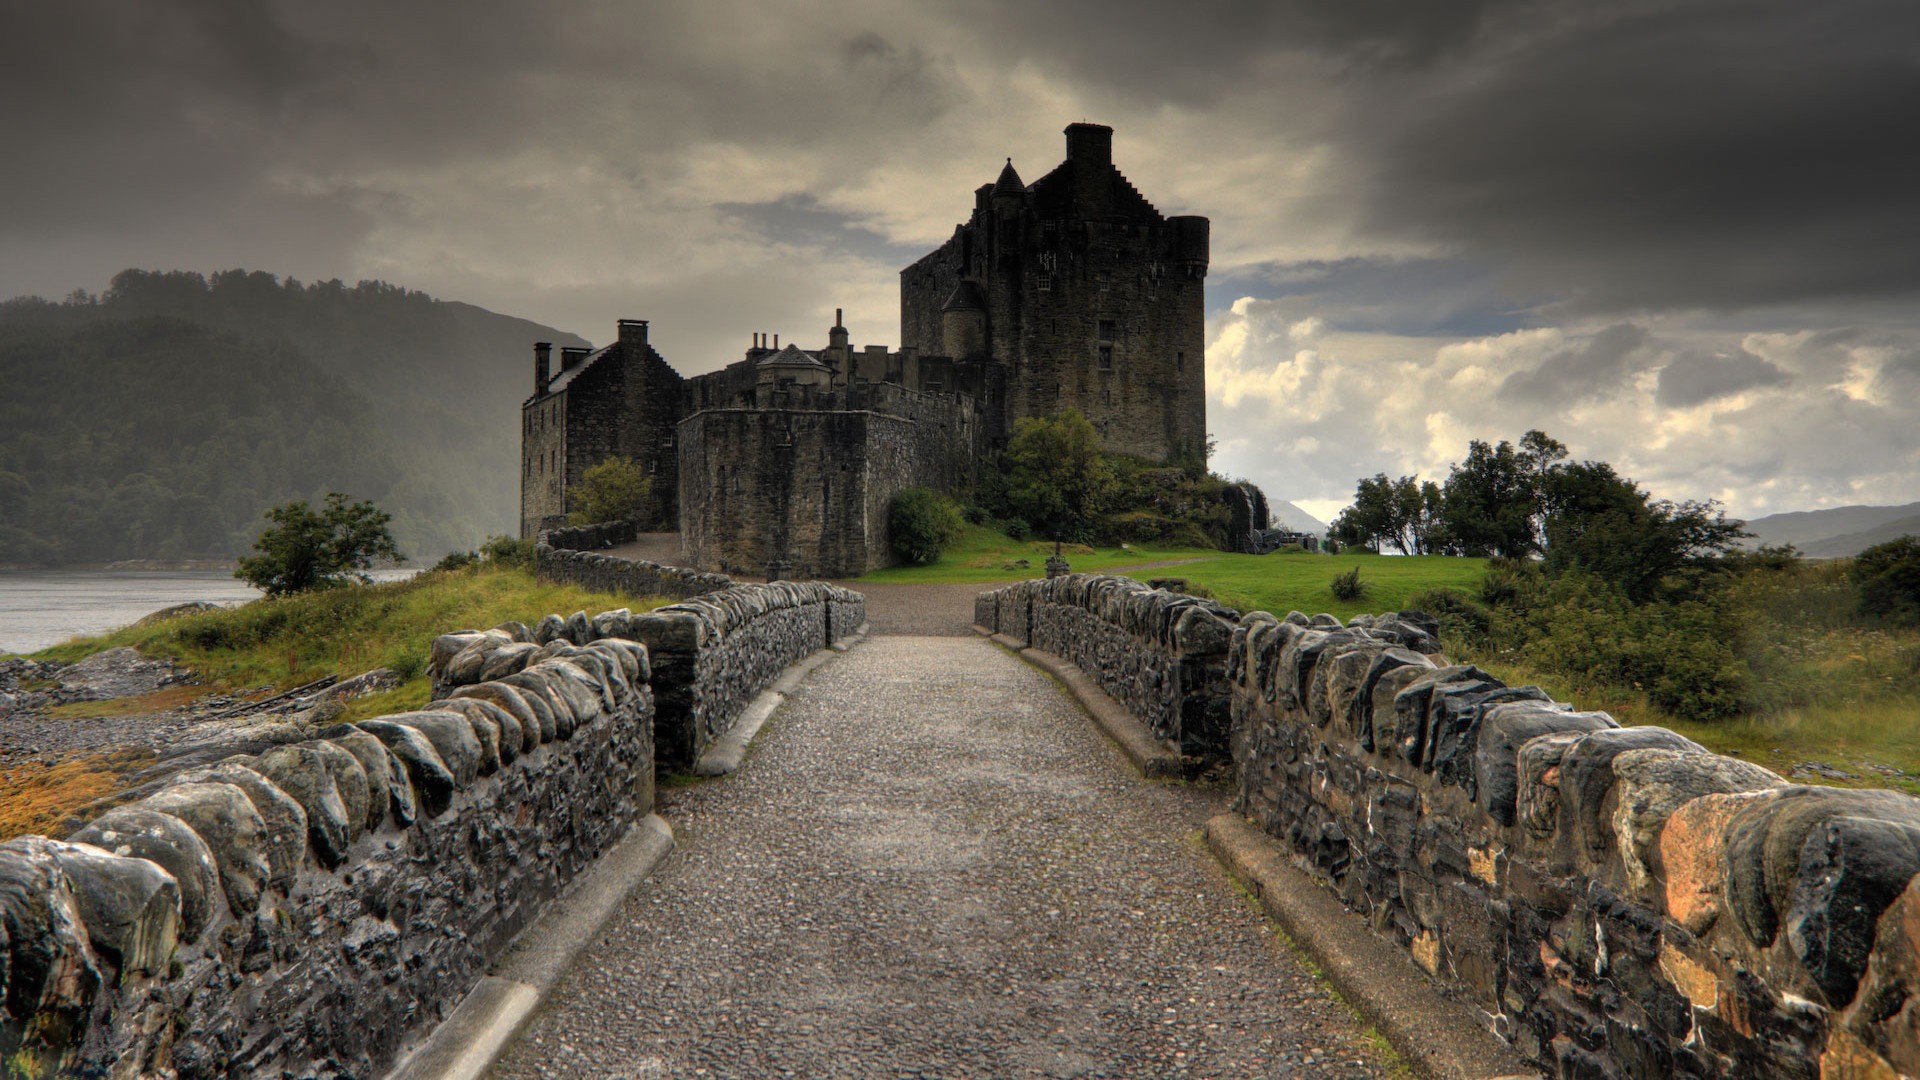 Stone road to the castle in Scotland wallpapers and images ...